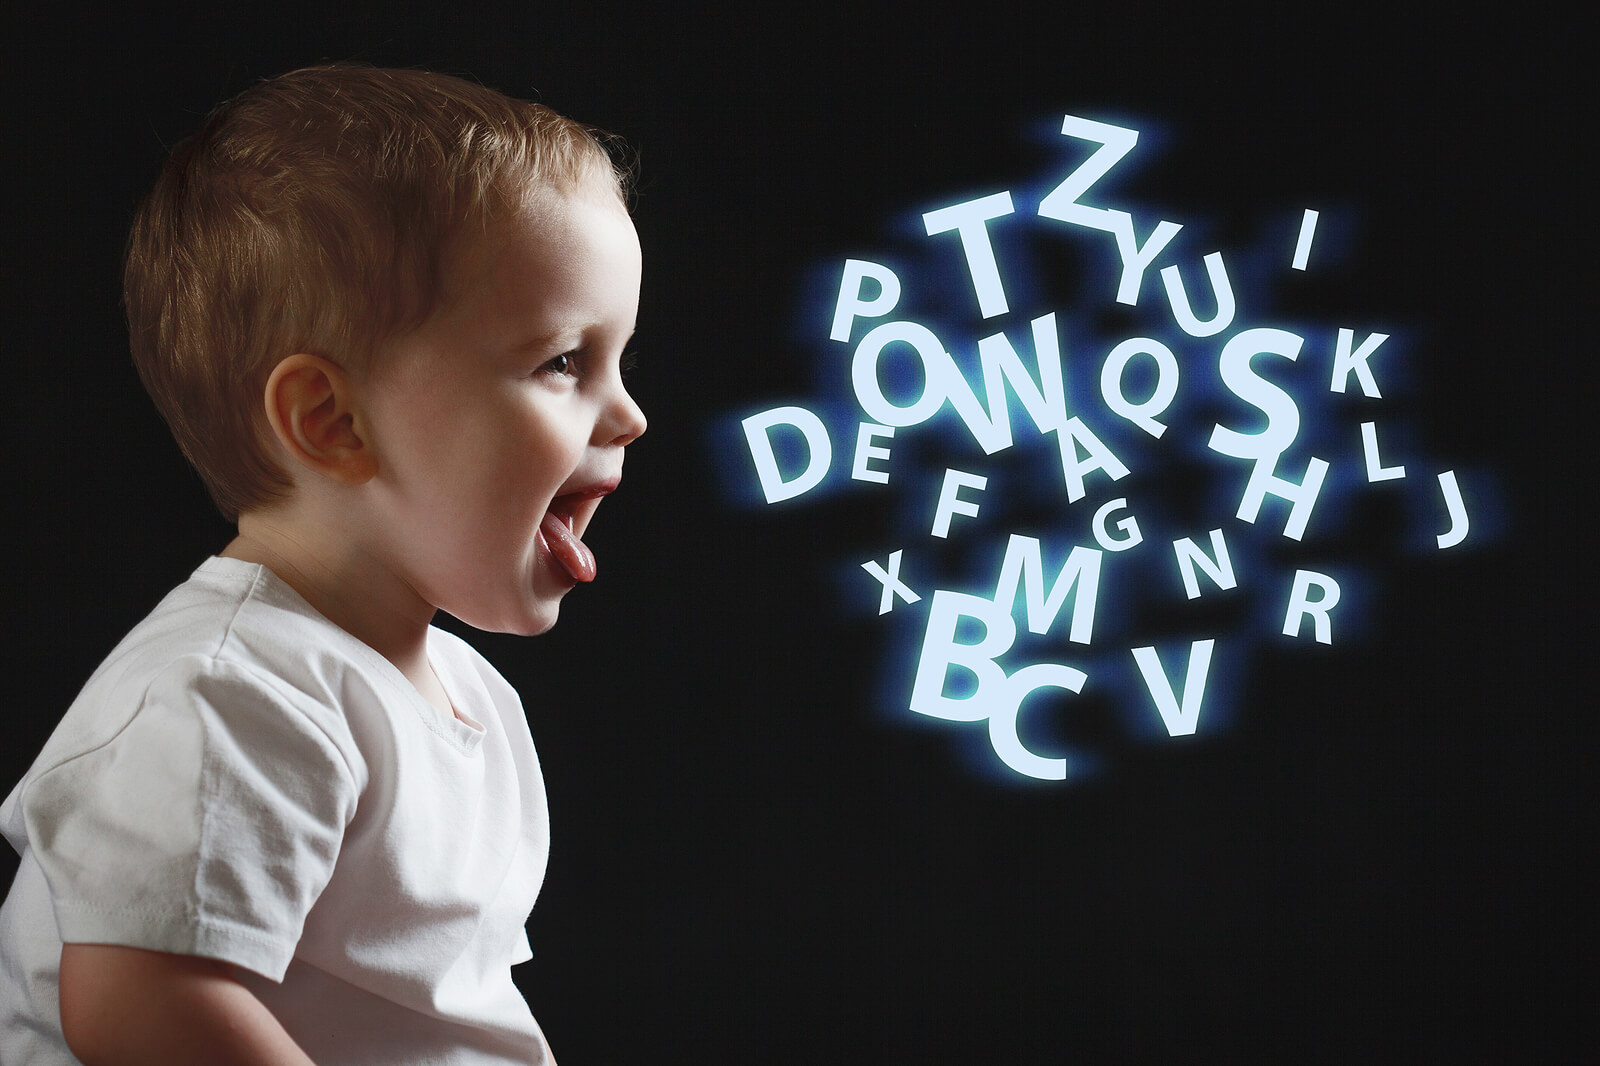 A baby speaking, with the image of letters floating in the air in front of him.